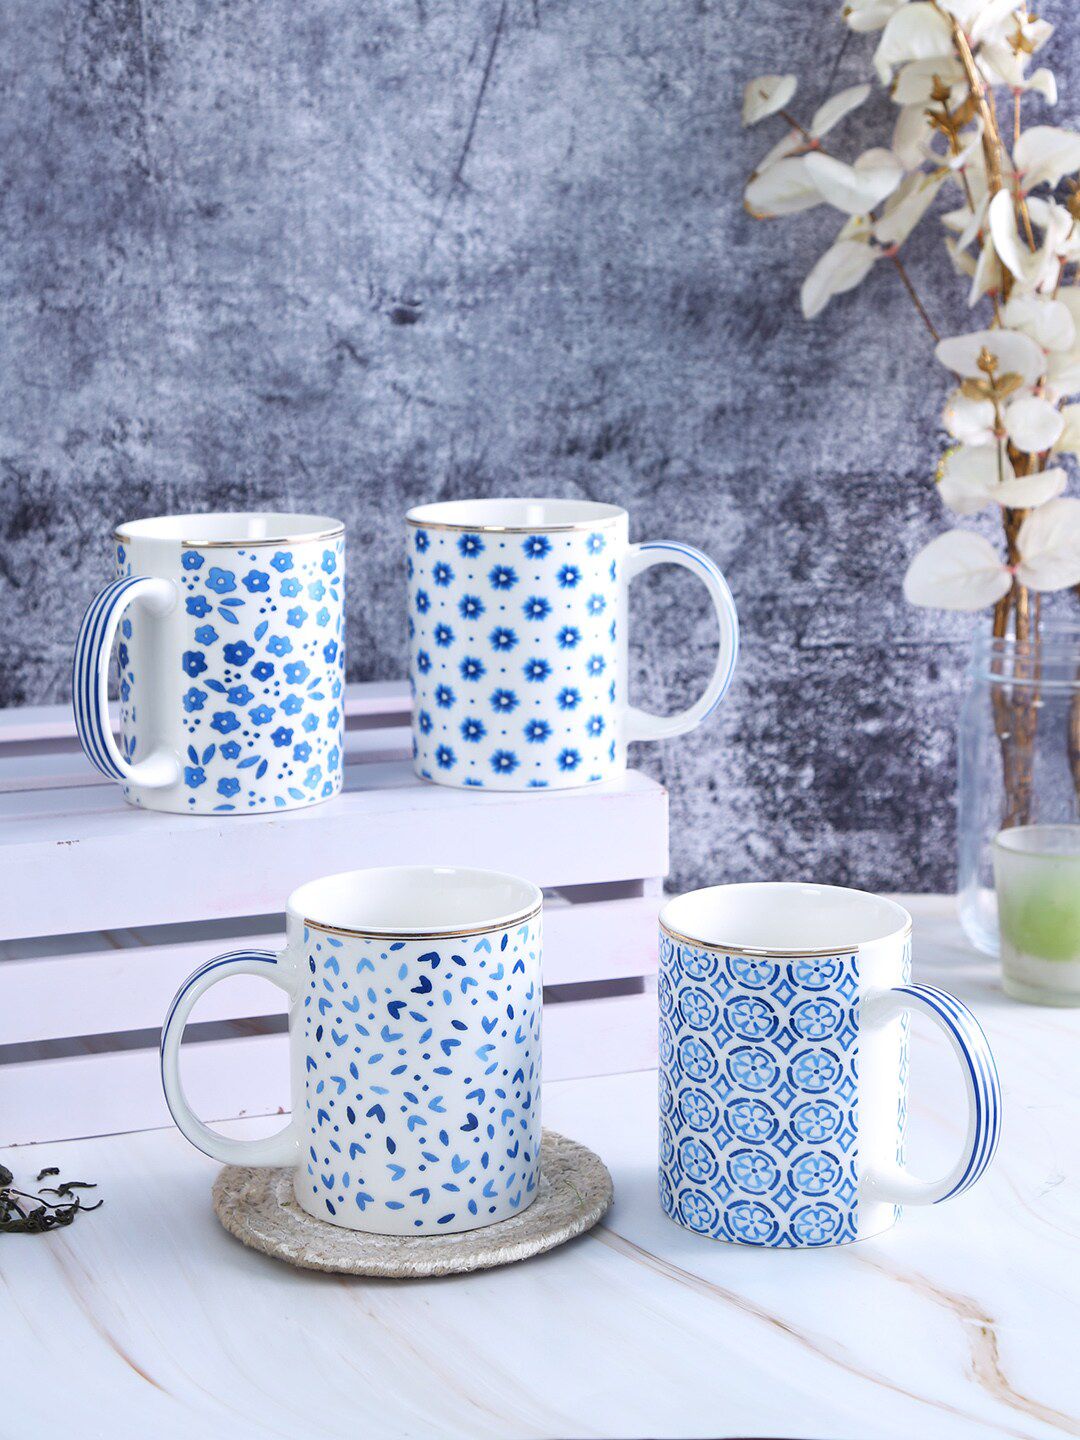 House Of Accessories Blue & White Floral Printed Ceramic Glossy Mugs Set of Cups and Mugs Price in India